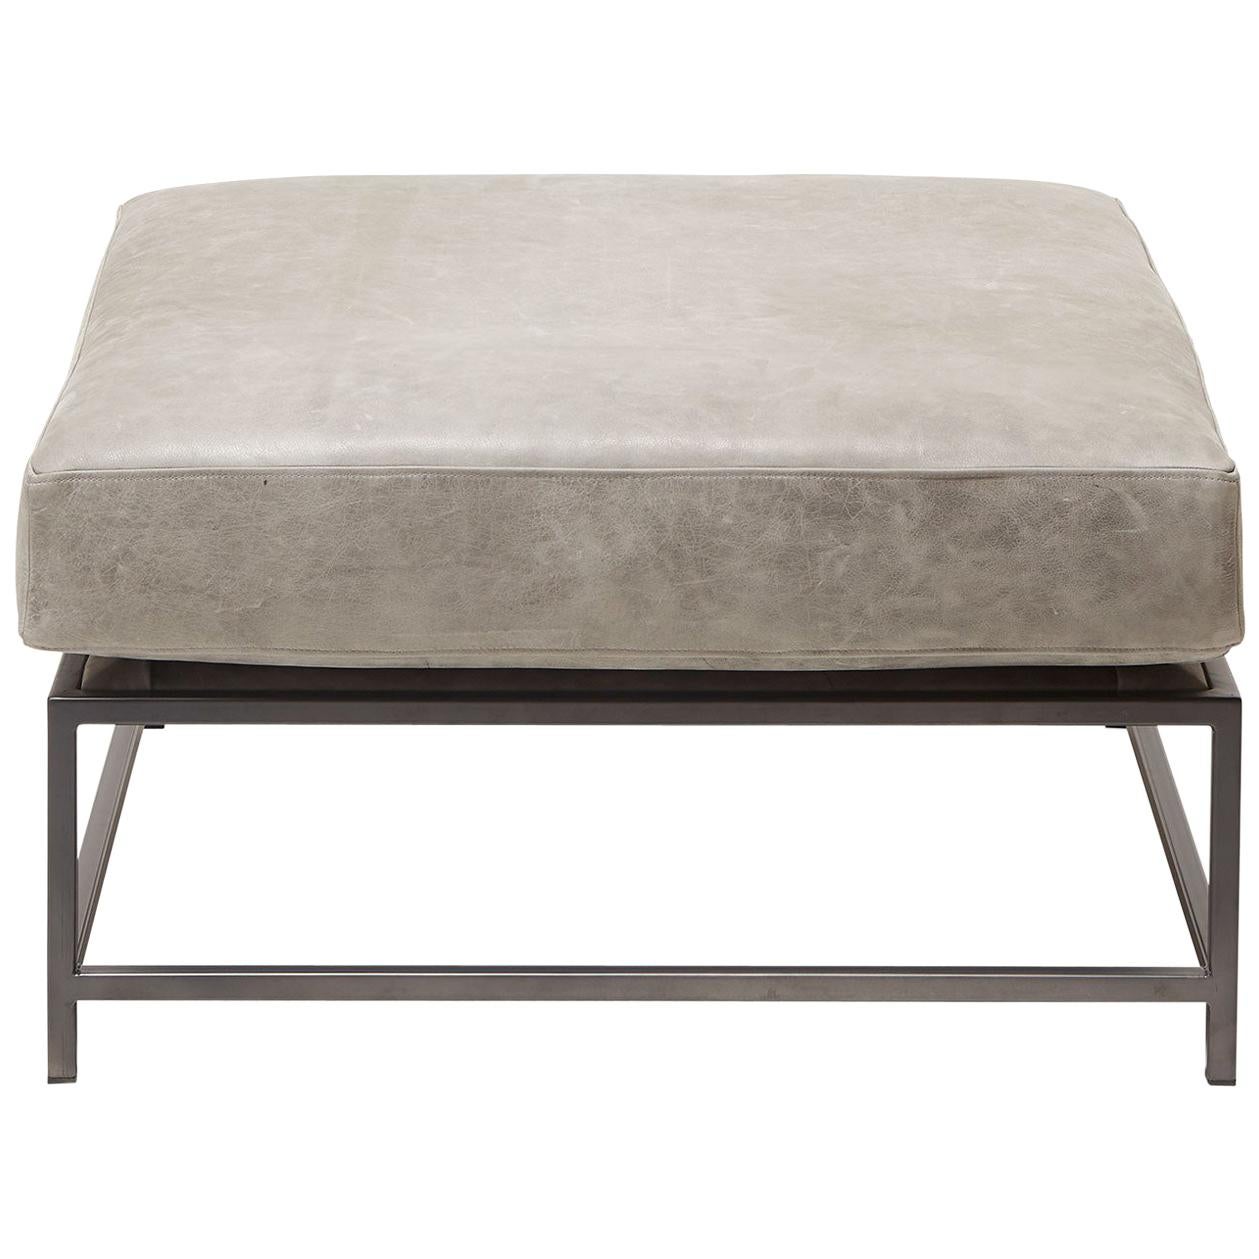 Grey Waxed Leather Ottoman with Charcoal Powdercoat Frame For Sale